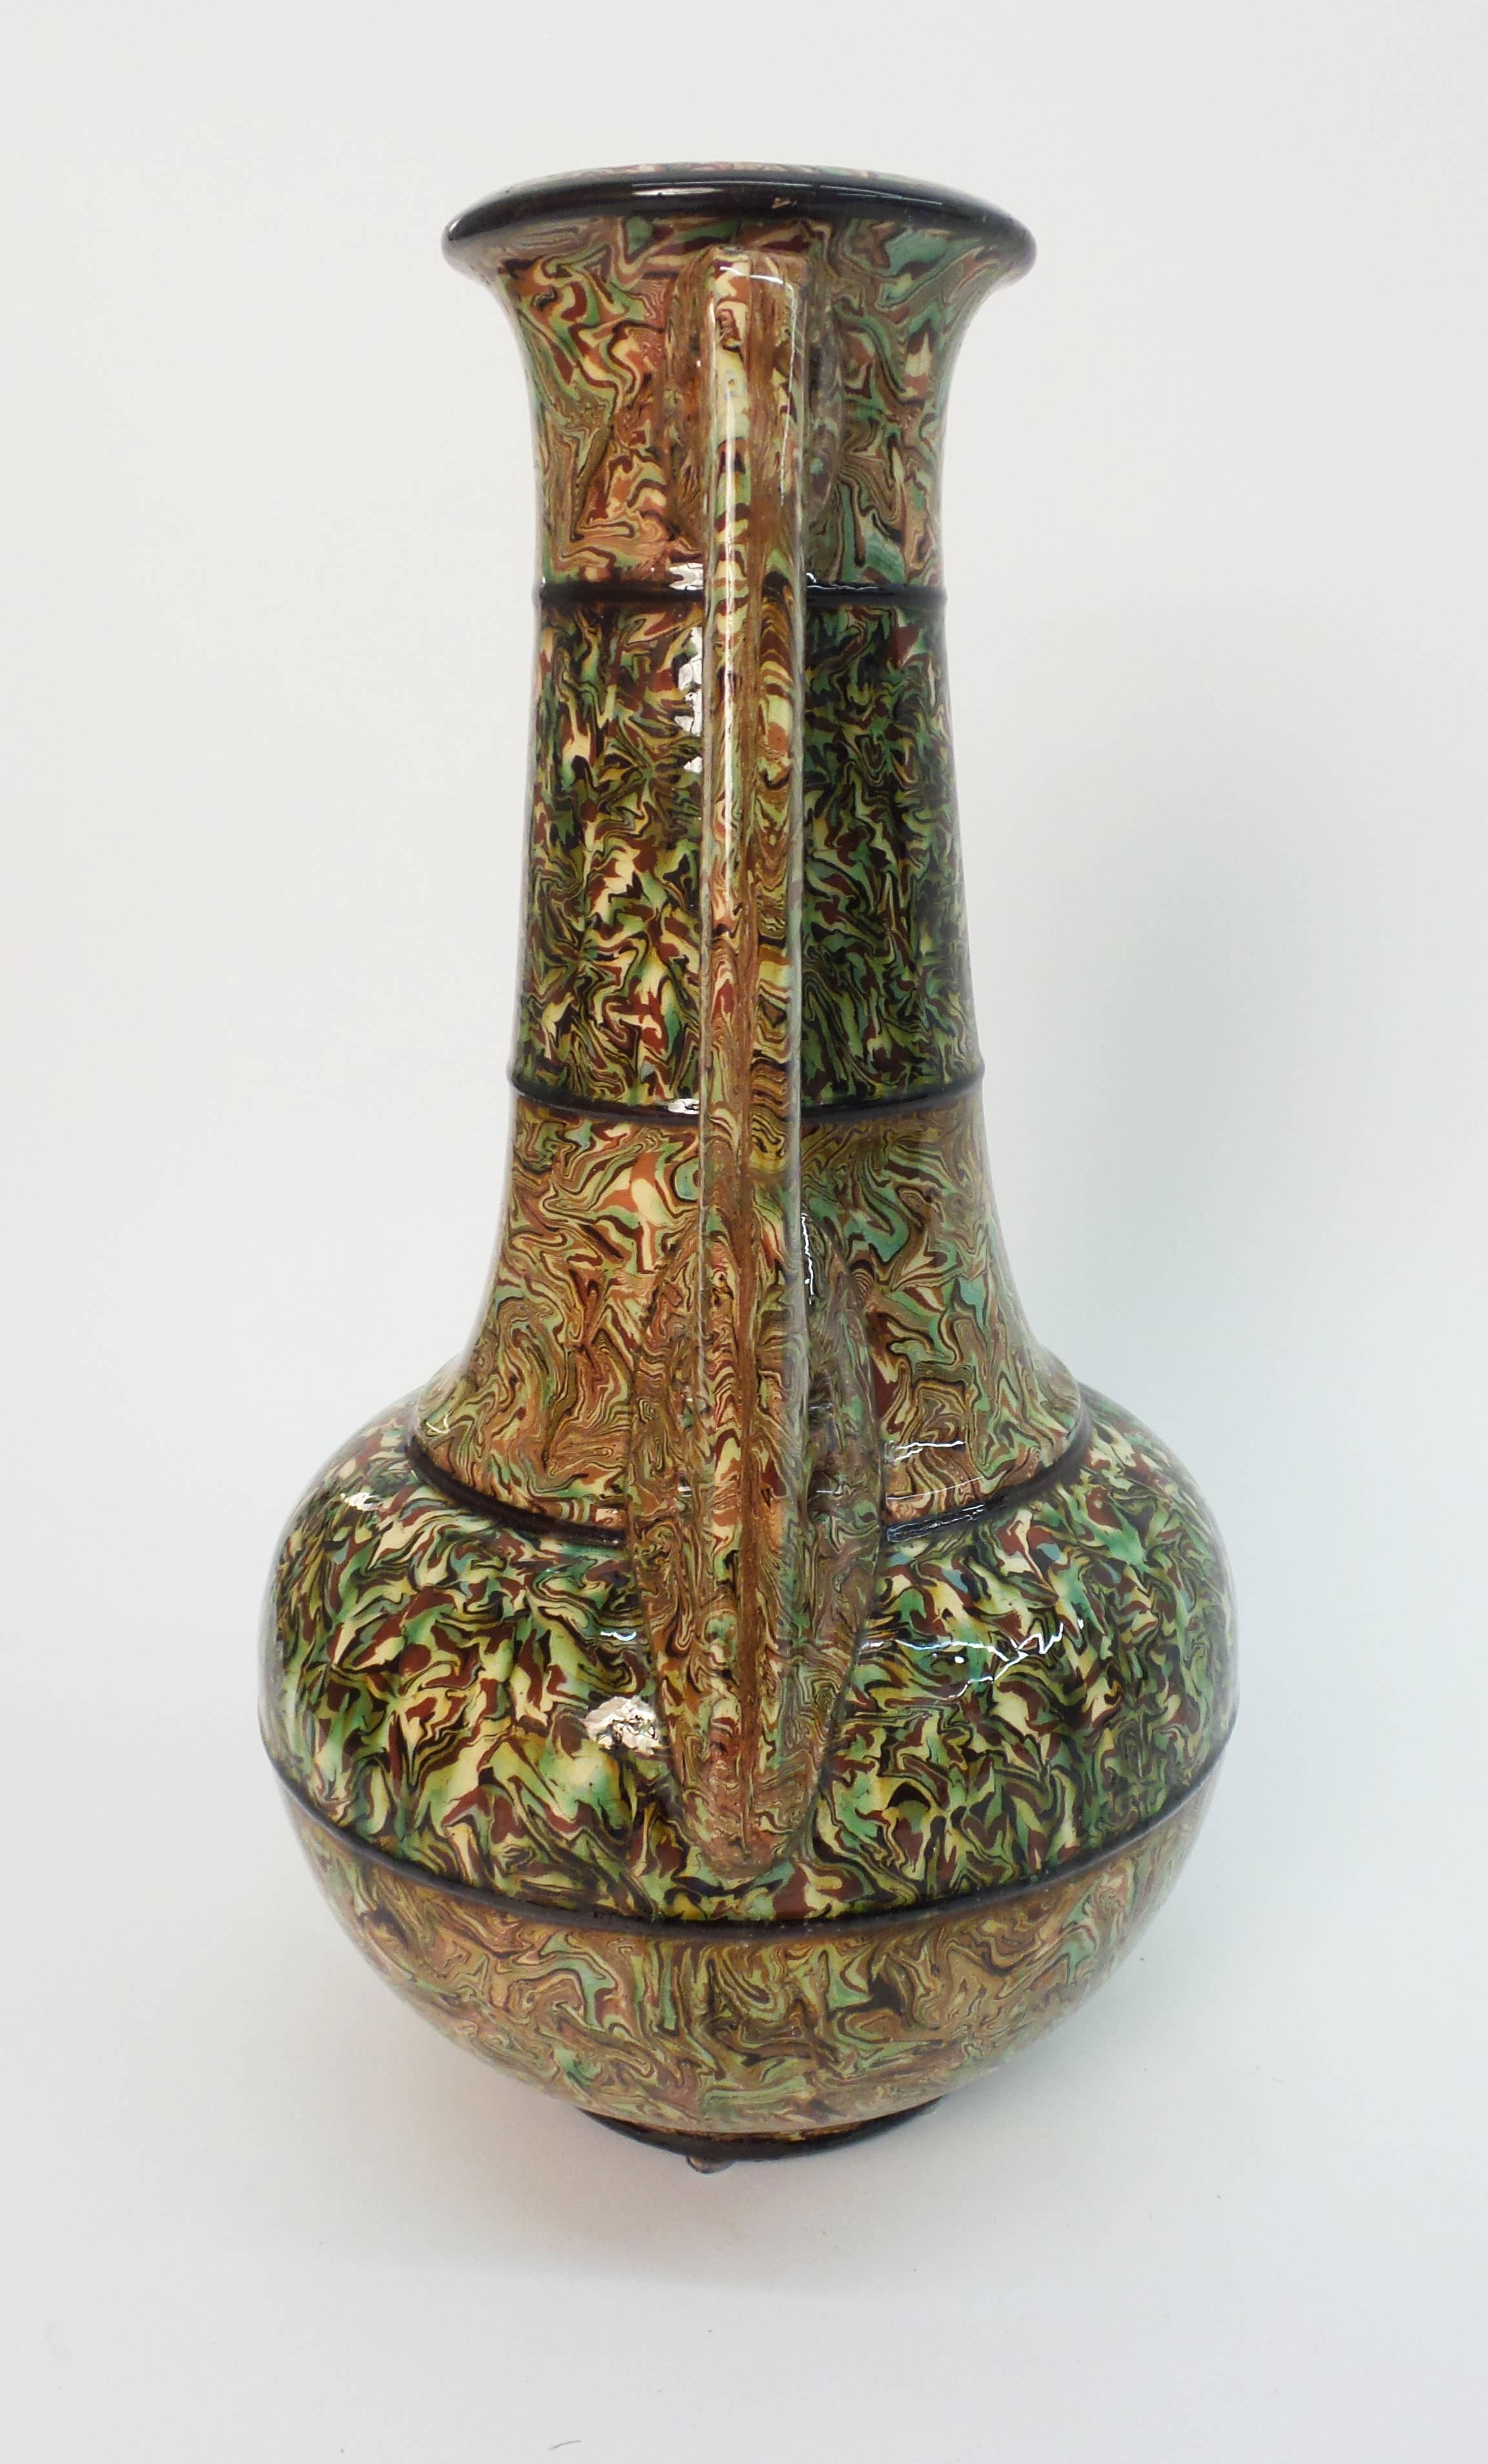 Art Nouveau Pottery Vase by Pichon In Excellent Condition For Sale In Long Island City, NY